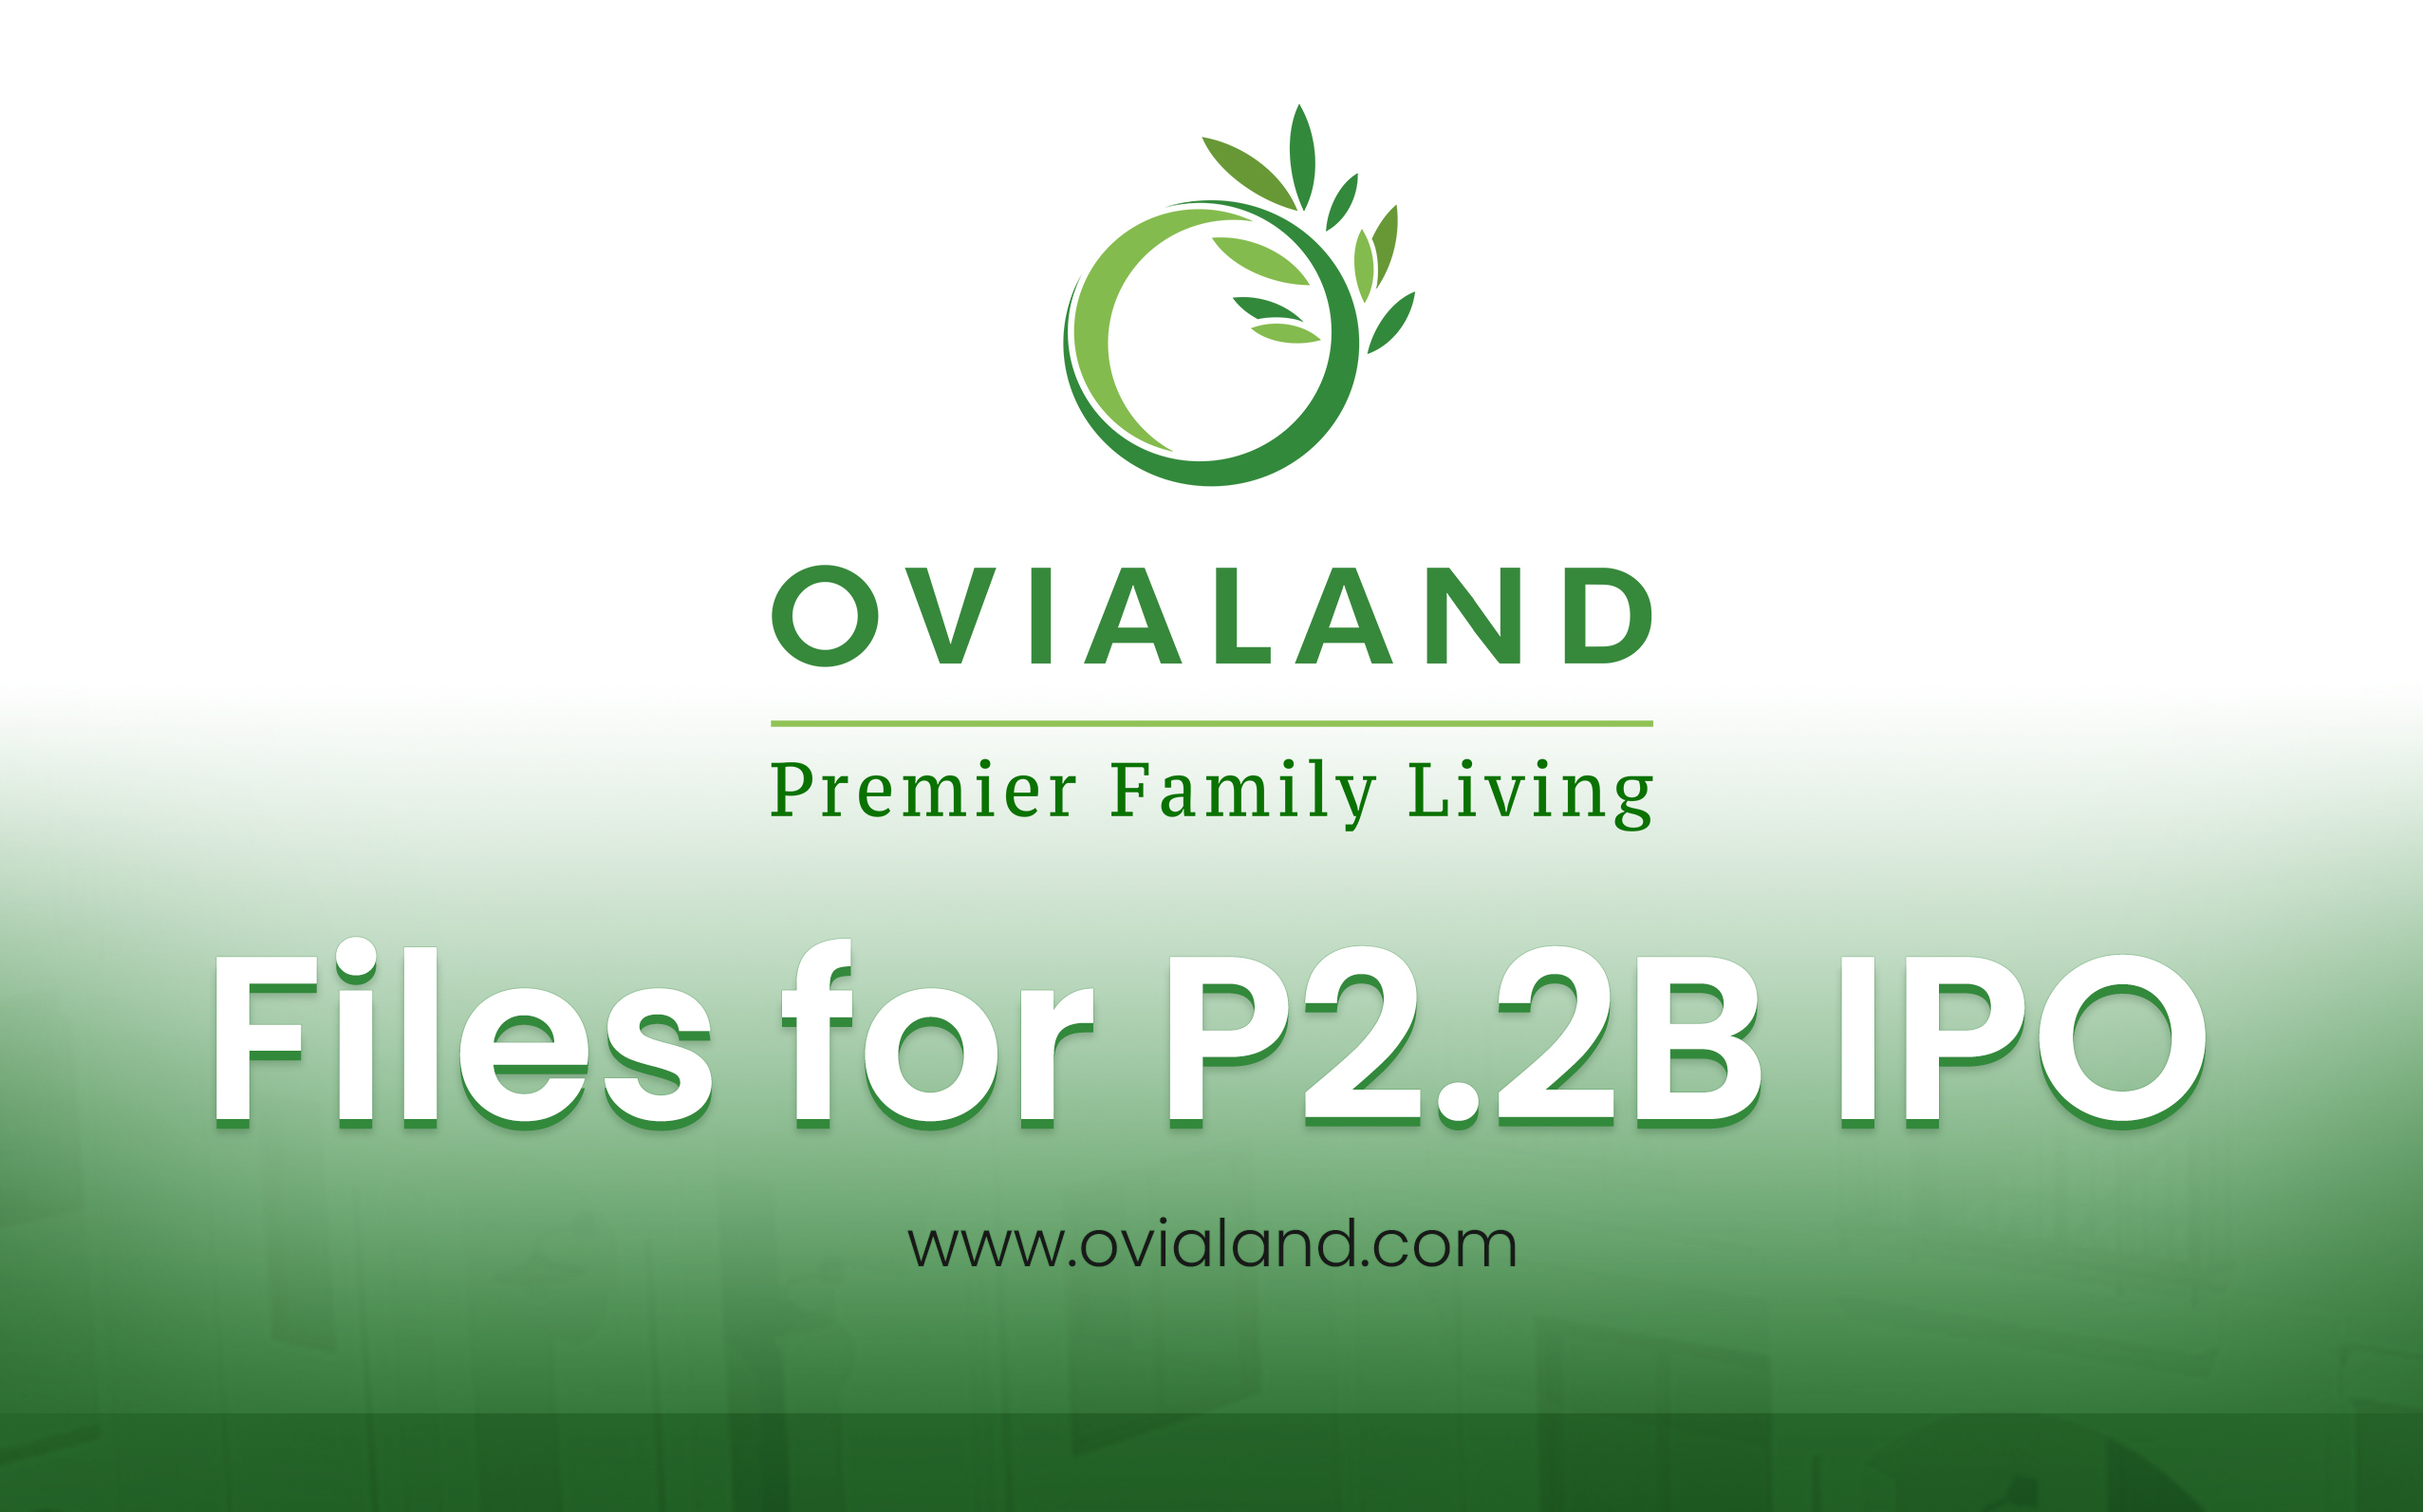 ovialand-files-for-P2.2B-ipo